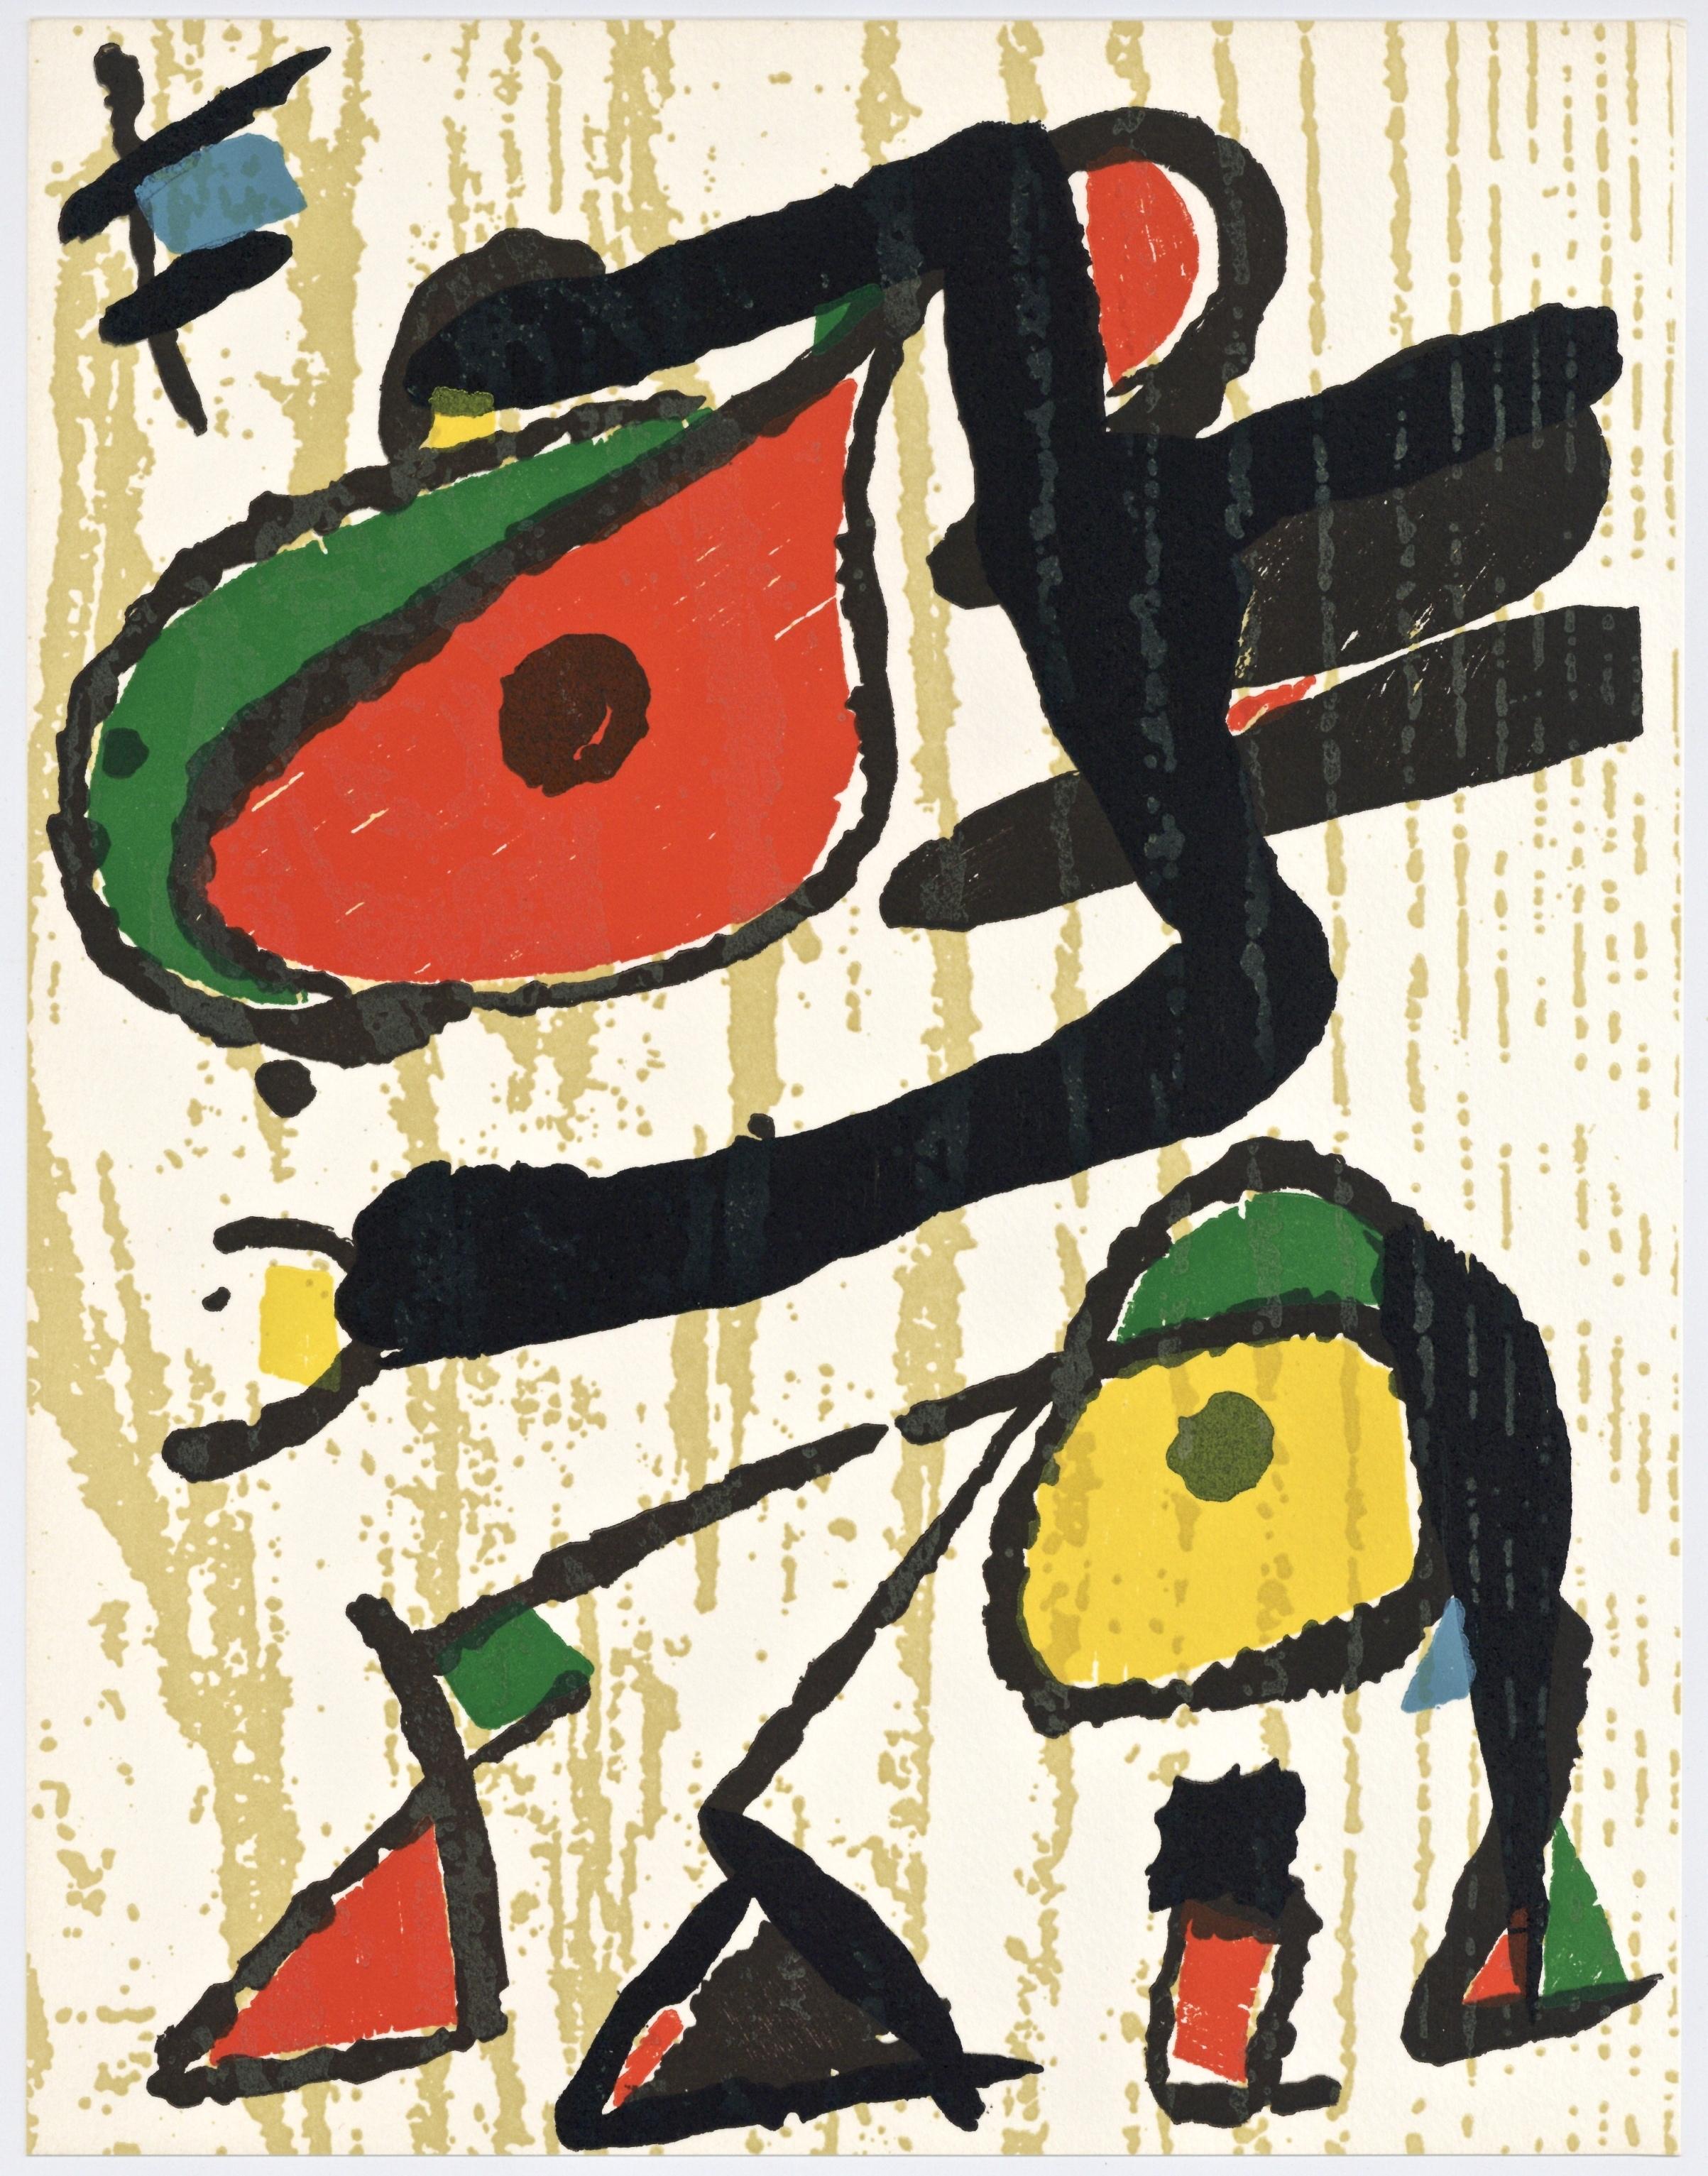 What was Joan Miro's art style?